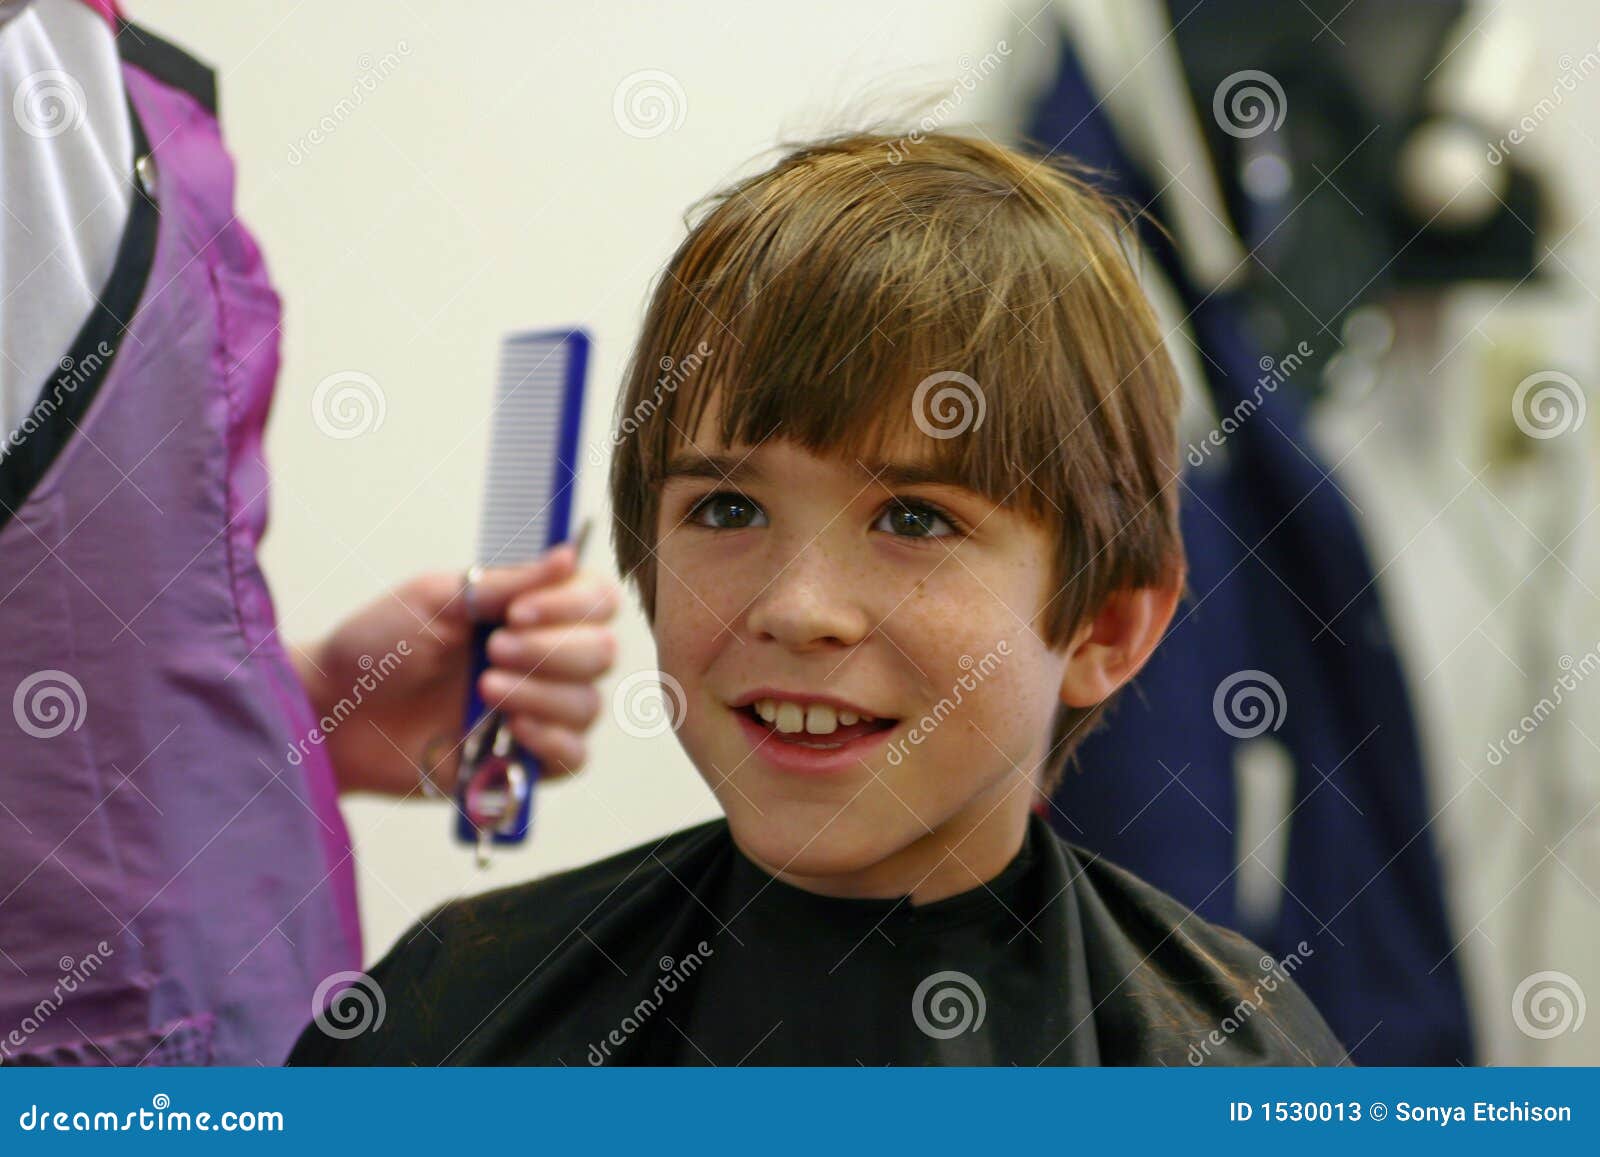 Boy Getting a Haircut stock image. Image of barber 